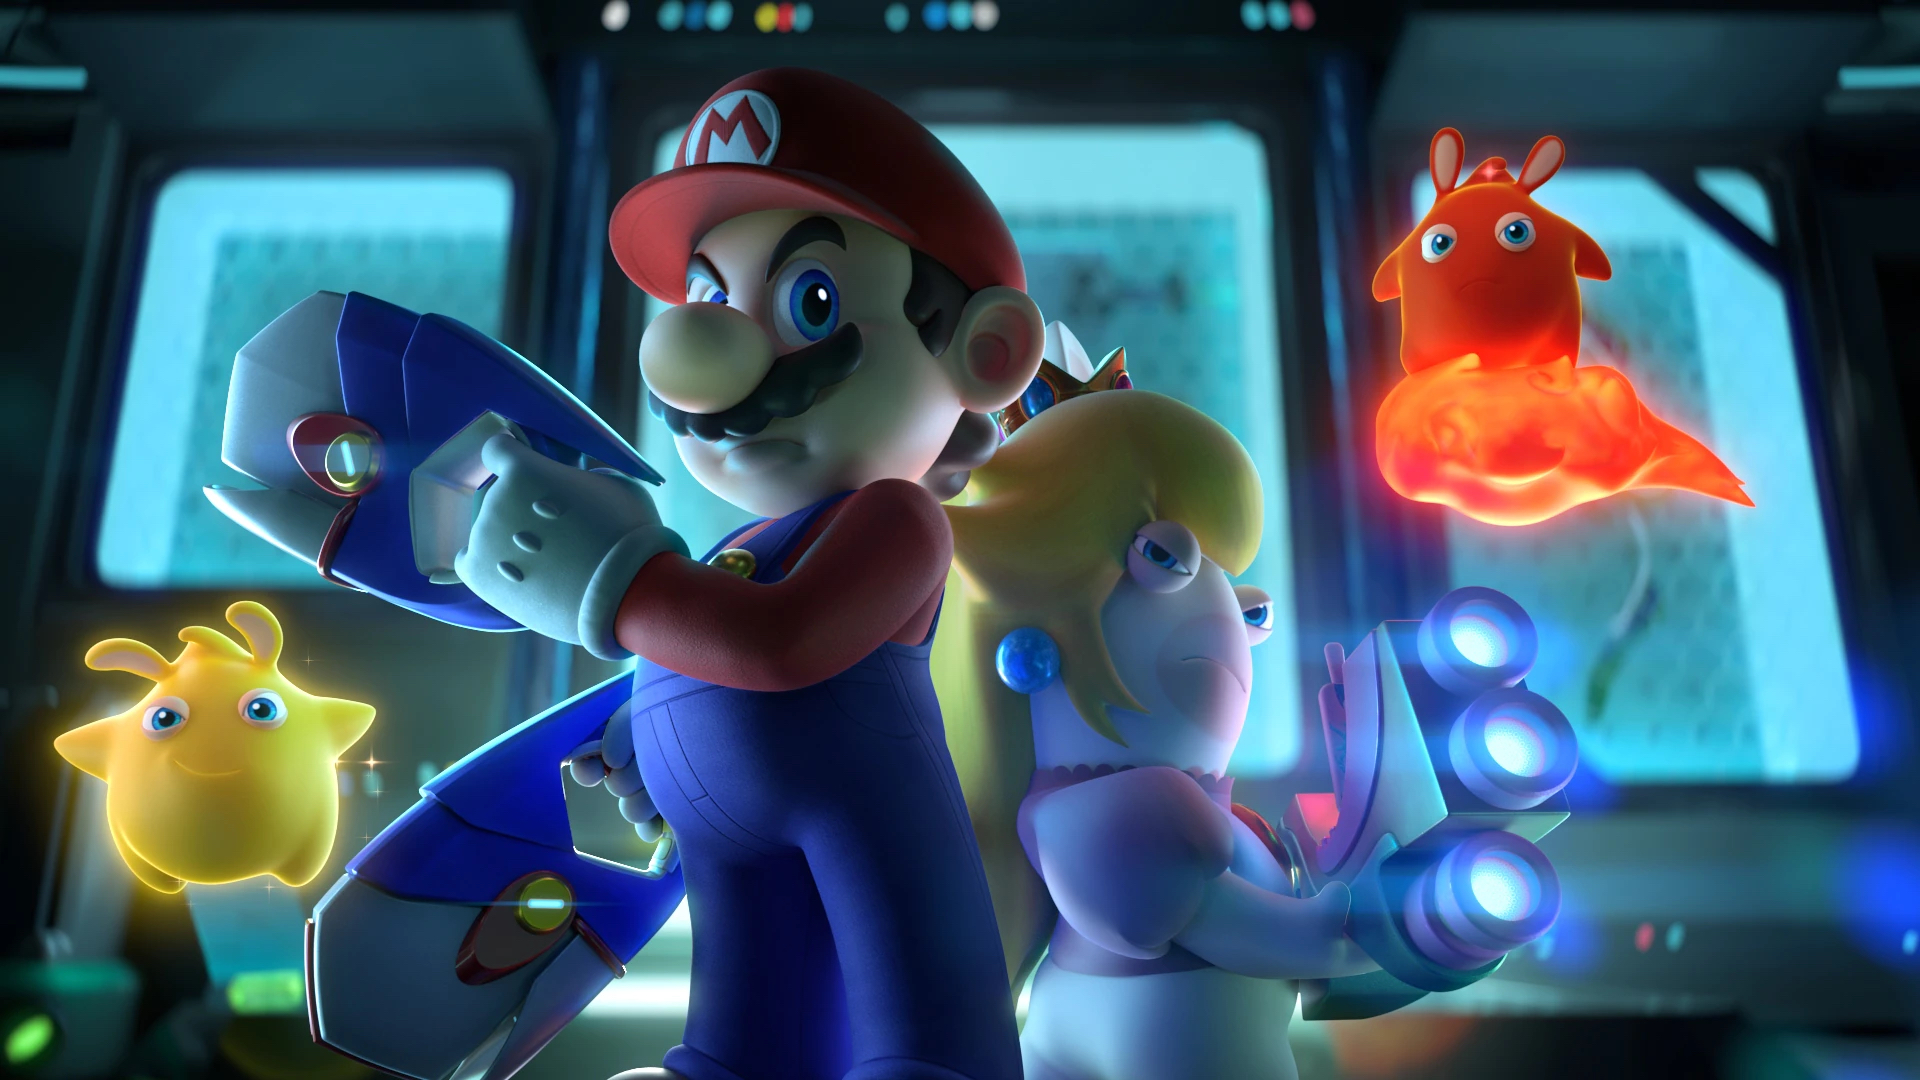 E3 2021: Mario + Rabbids Sparks of Hope leaked, with Bowser and